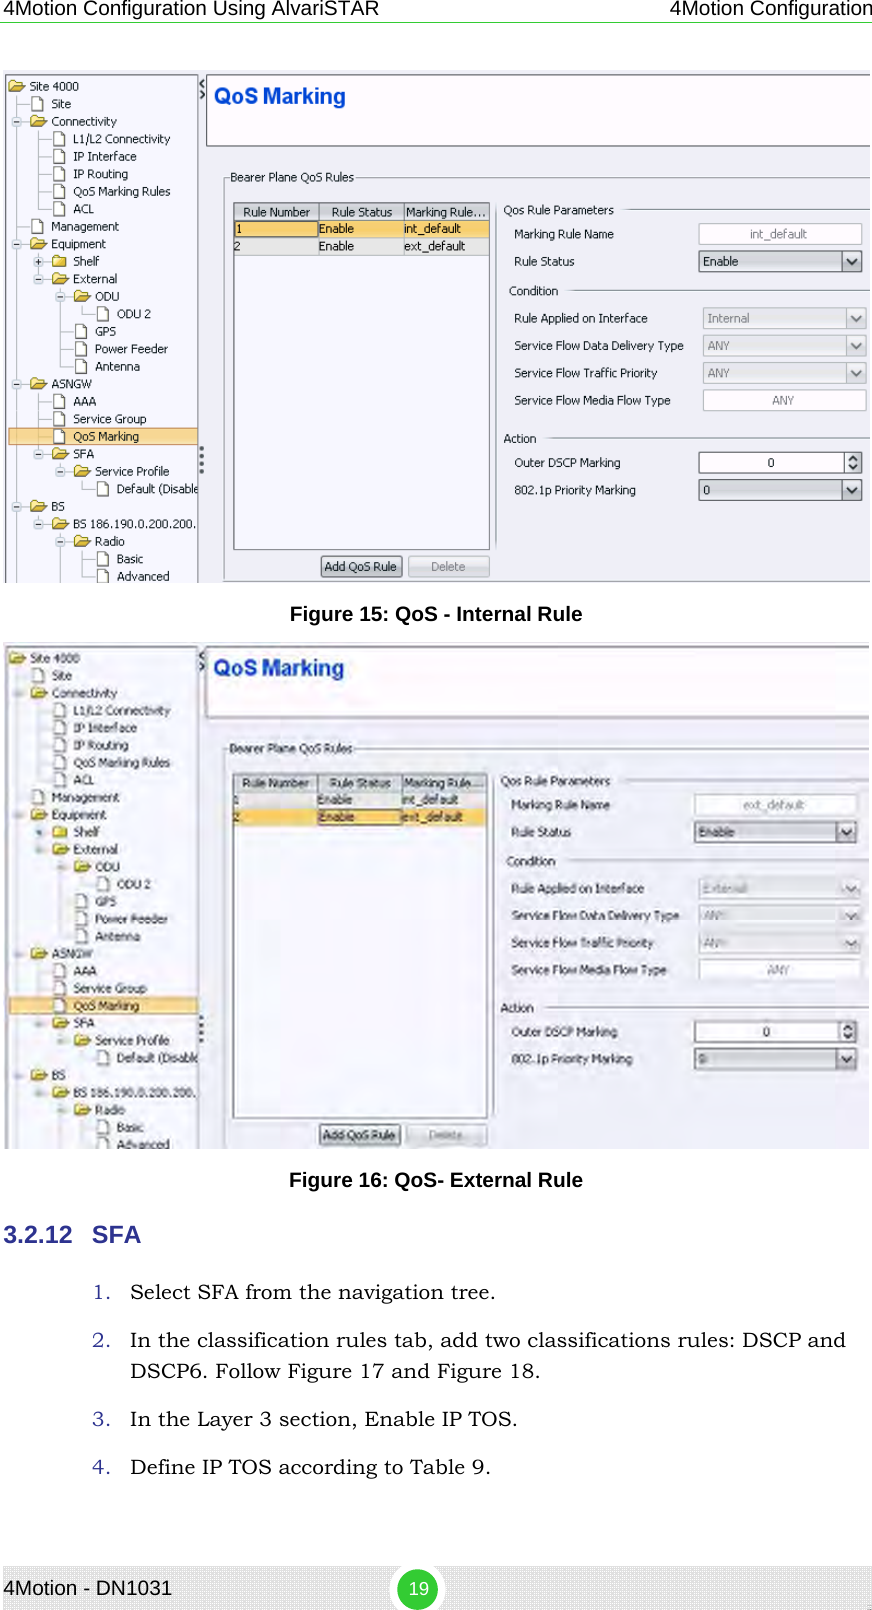 4Motion Configuration Using AlvariSTAR 4Motion Configuration  Figure 15: QoS - Internal Rule  Figure 16: QoS- External Rule 3.2.12  SFA 1. Select SFA from the navigation tree. 2. In the classification rules tab, add two classifications rules: DSCP and DSCP6. Follow Figure 17 and Figure 18. 3. In the Layer 3 section, Enable IP TOS. 4. Define IP TOS according to Table 9. 4Motion - DN1031  19 